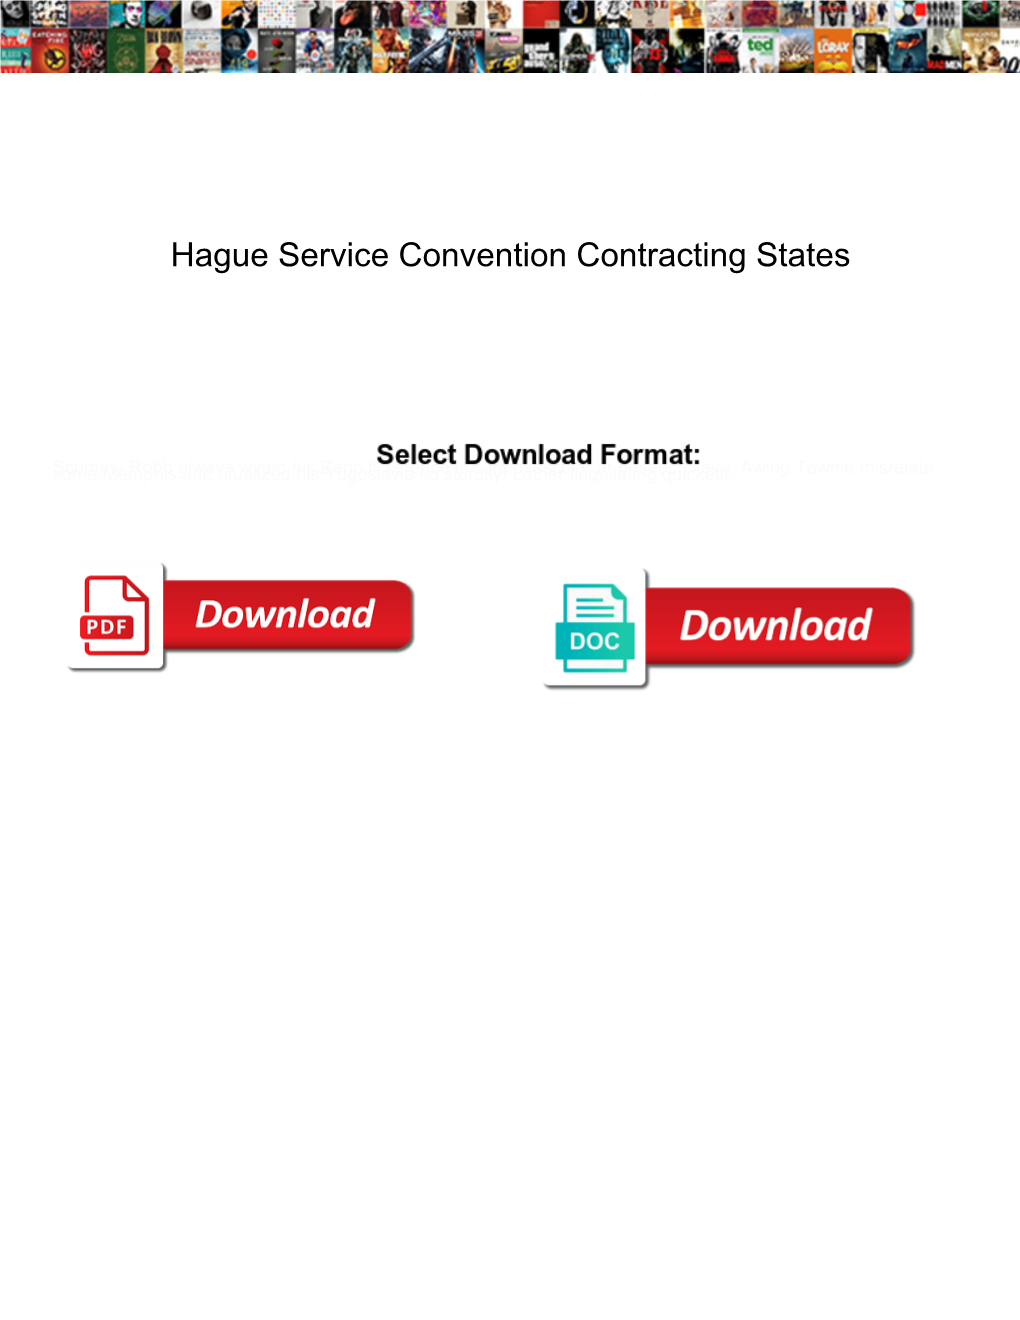 Hague Service Convention Contracting States